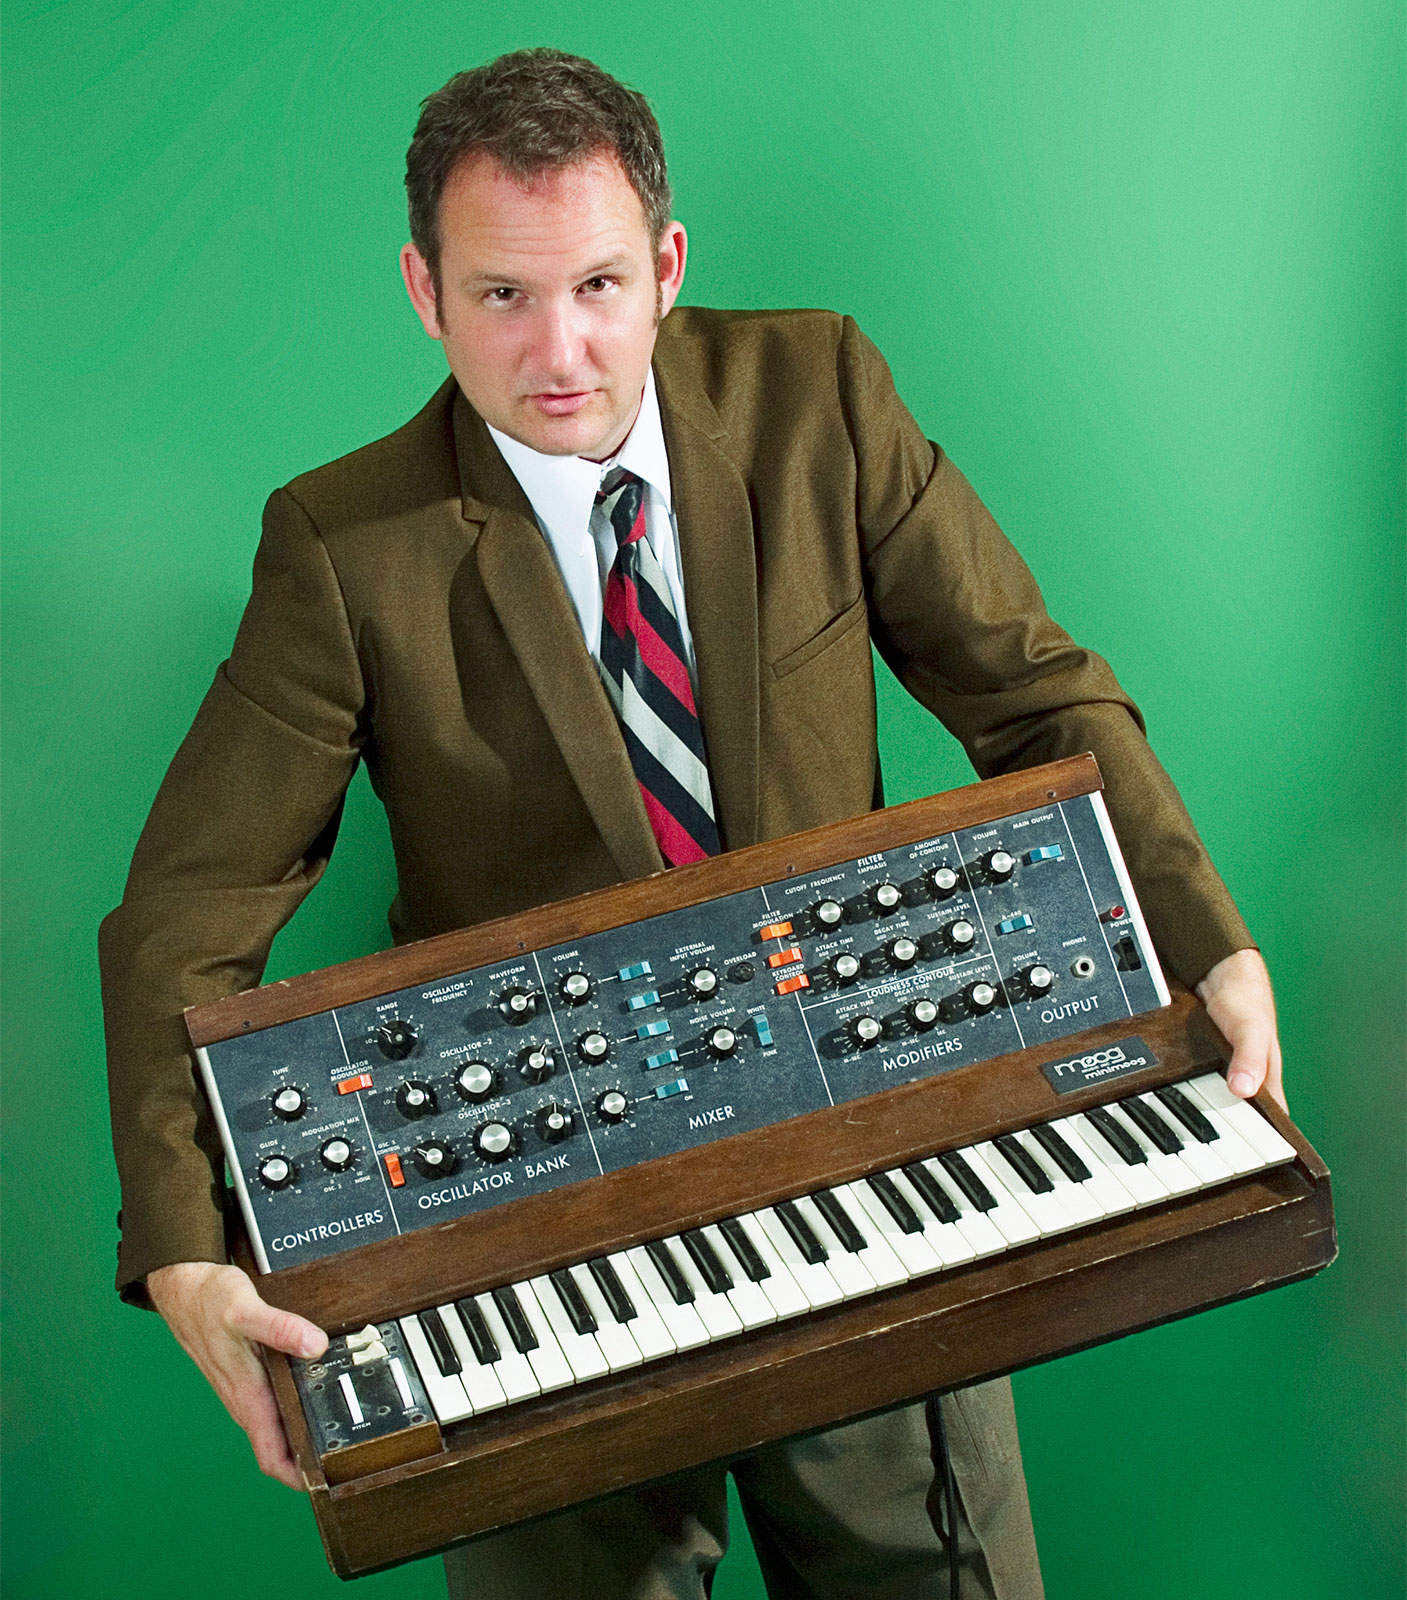 When the Moog strikes, Parry Gripp writes funny songs about anything.